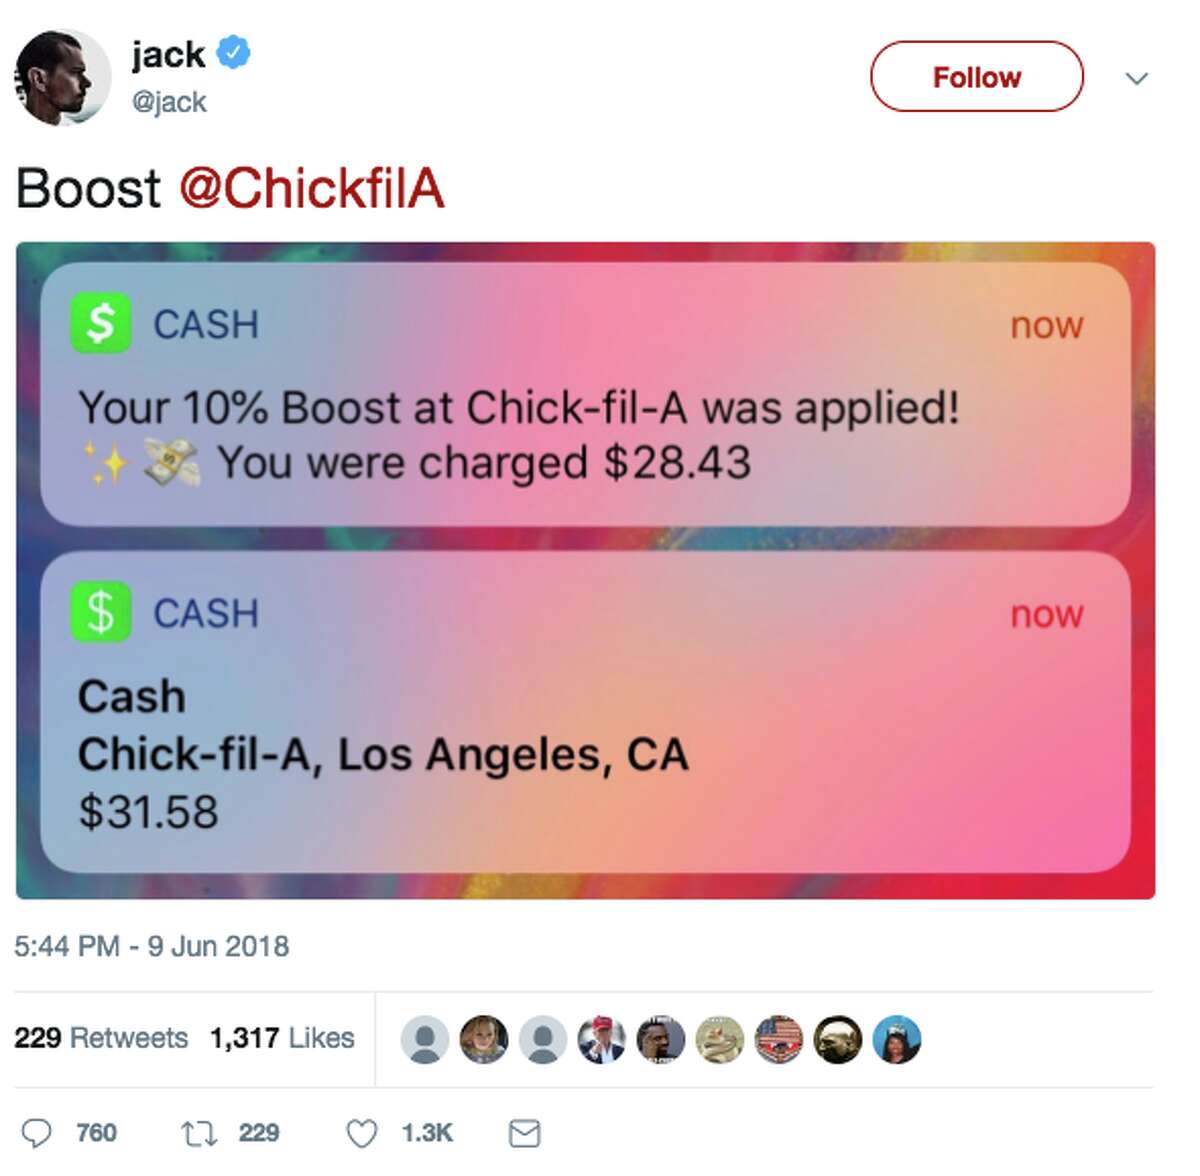 Twitter CEO Jack Dorsey shared a screenshot from his phone showing a purchase he made at Chick-fil-A on Saturday, June 9, 2018.